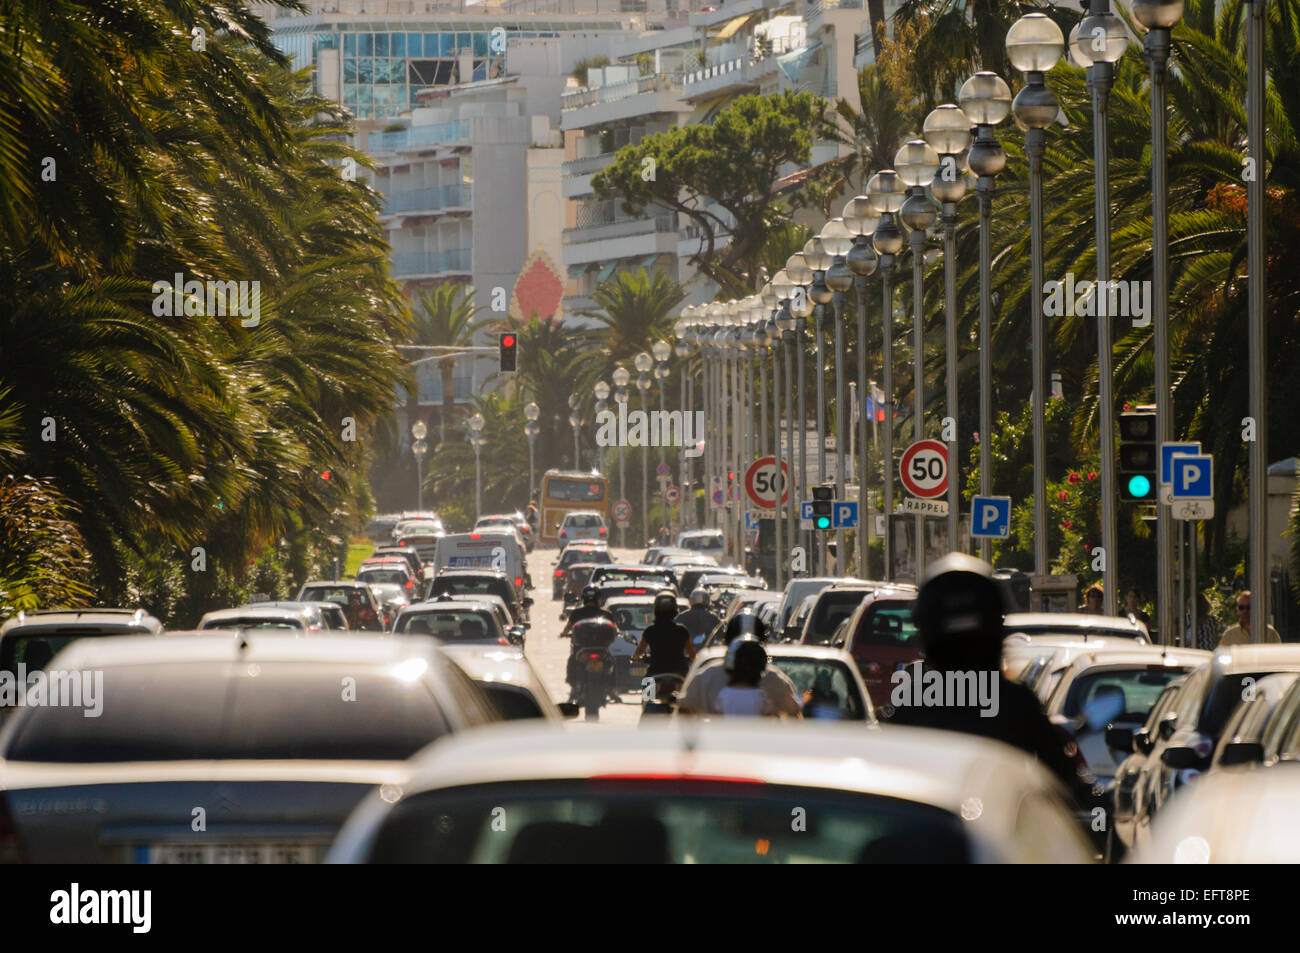 Heavily congested traffic in Nice, France. Stock Photo